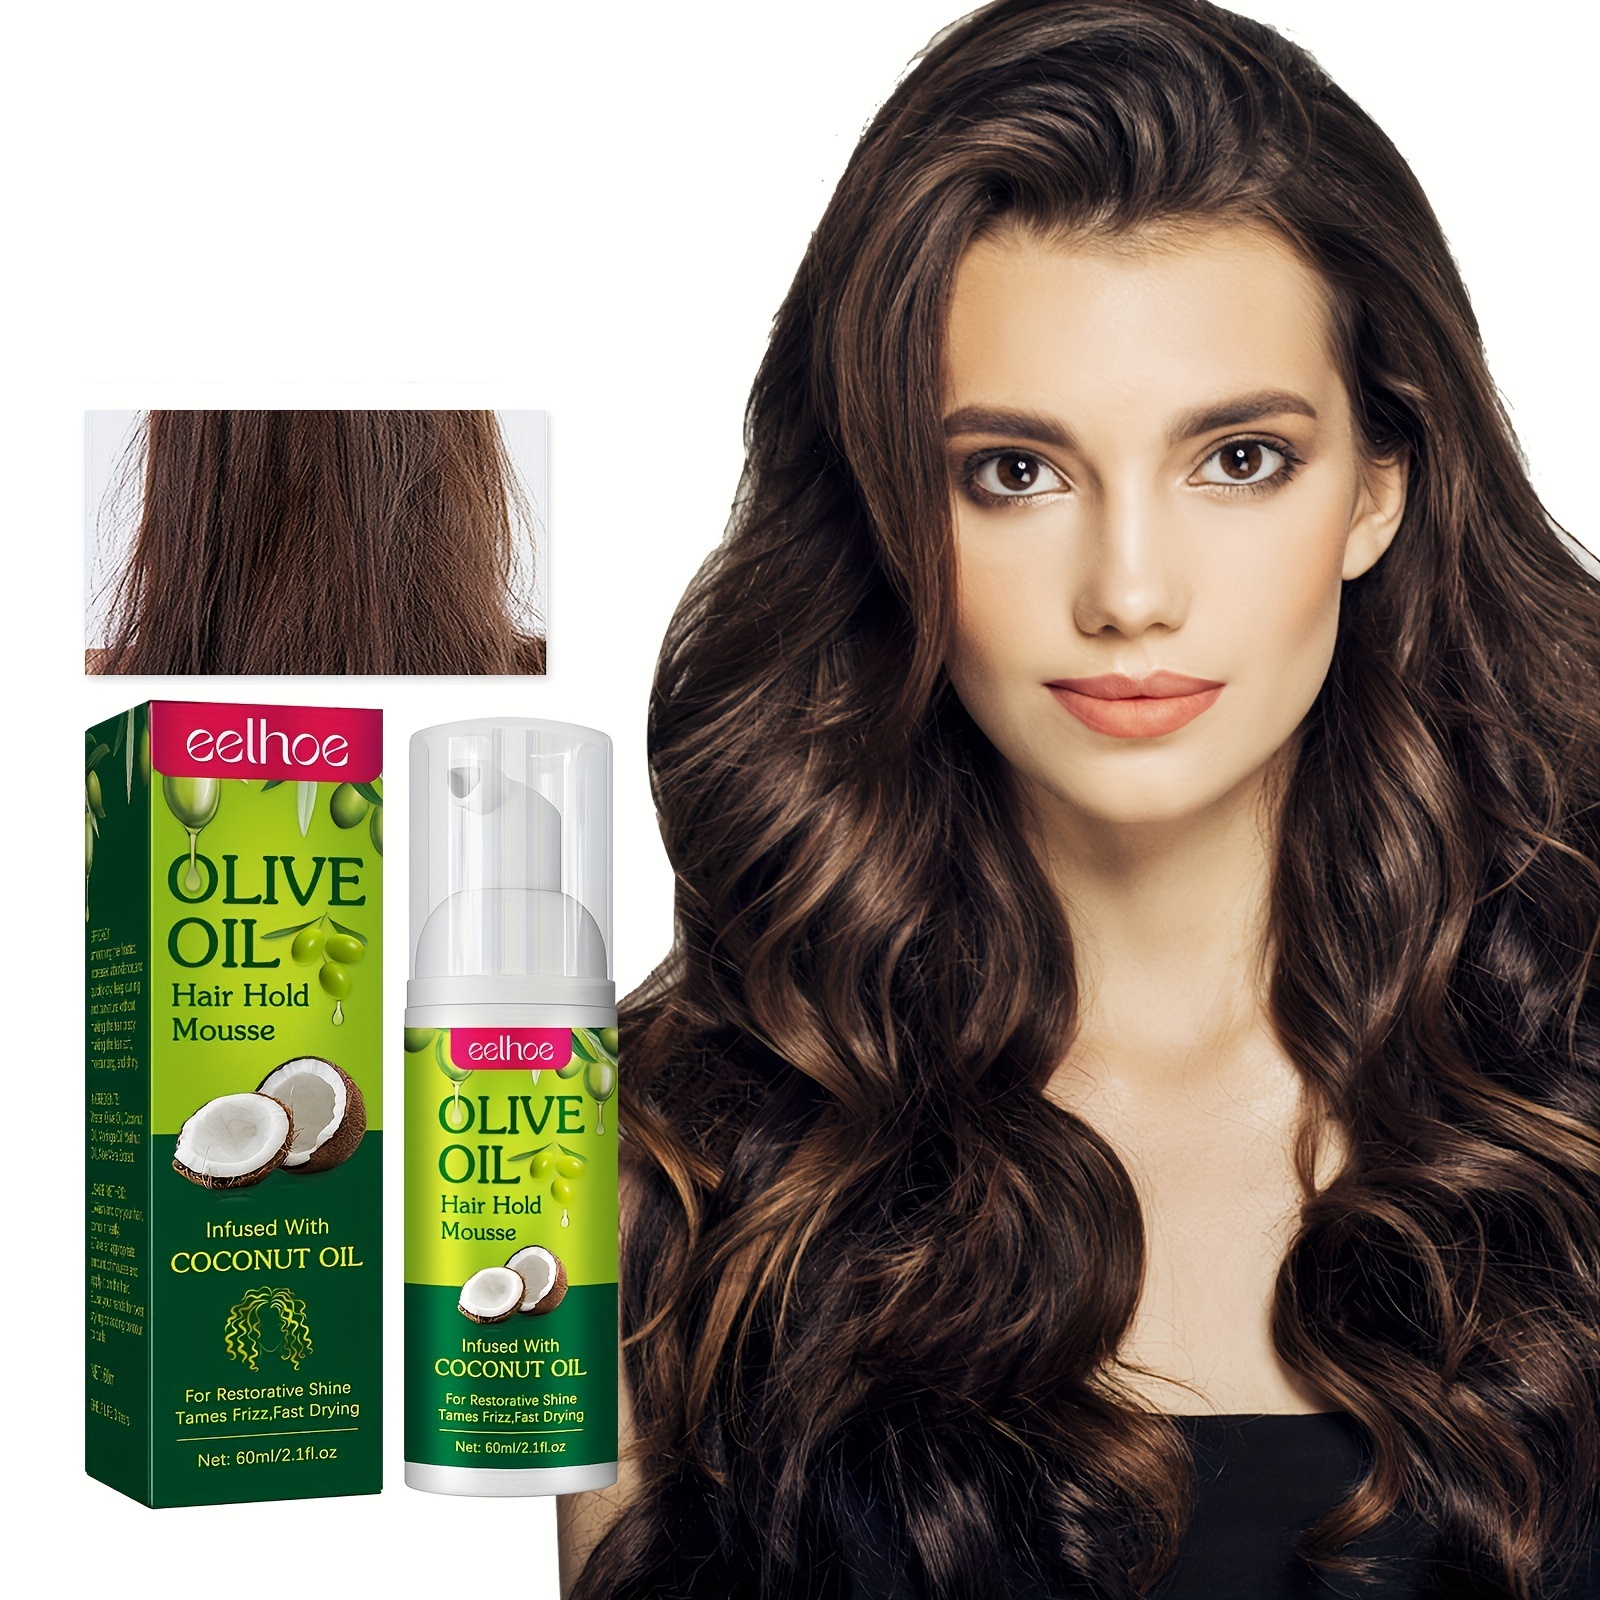 

Olive Oil Hair Hold Mousse, Hair Stying Mousse Infused With Coconut Oil Long Lasting Anti Frizz Hair Mousse For Curly Hair